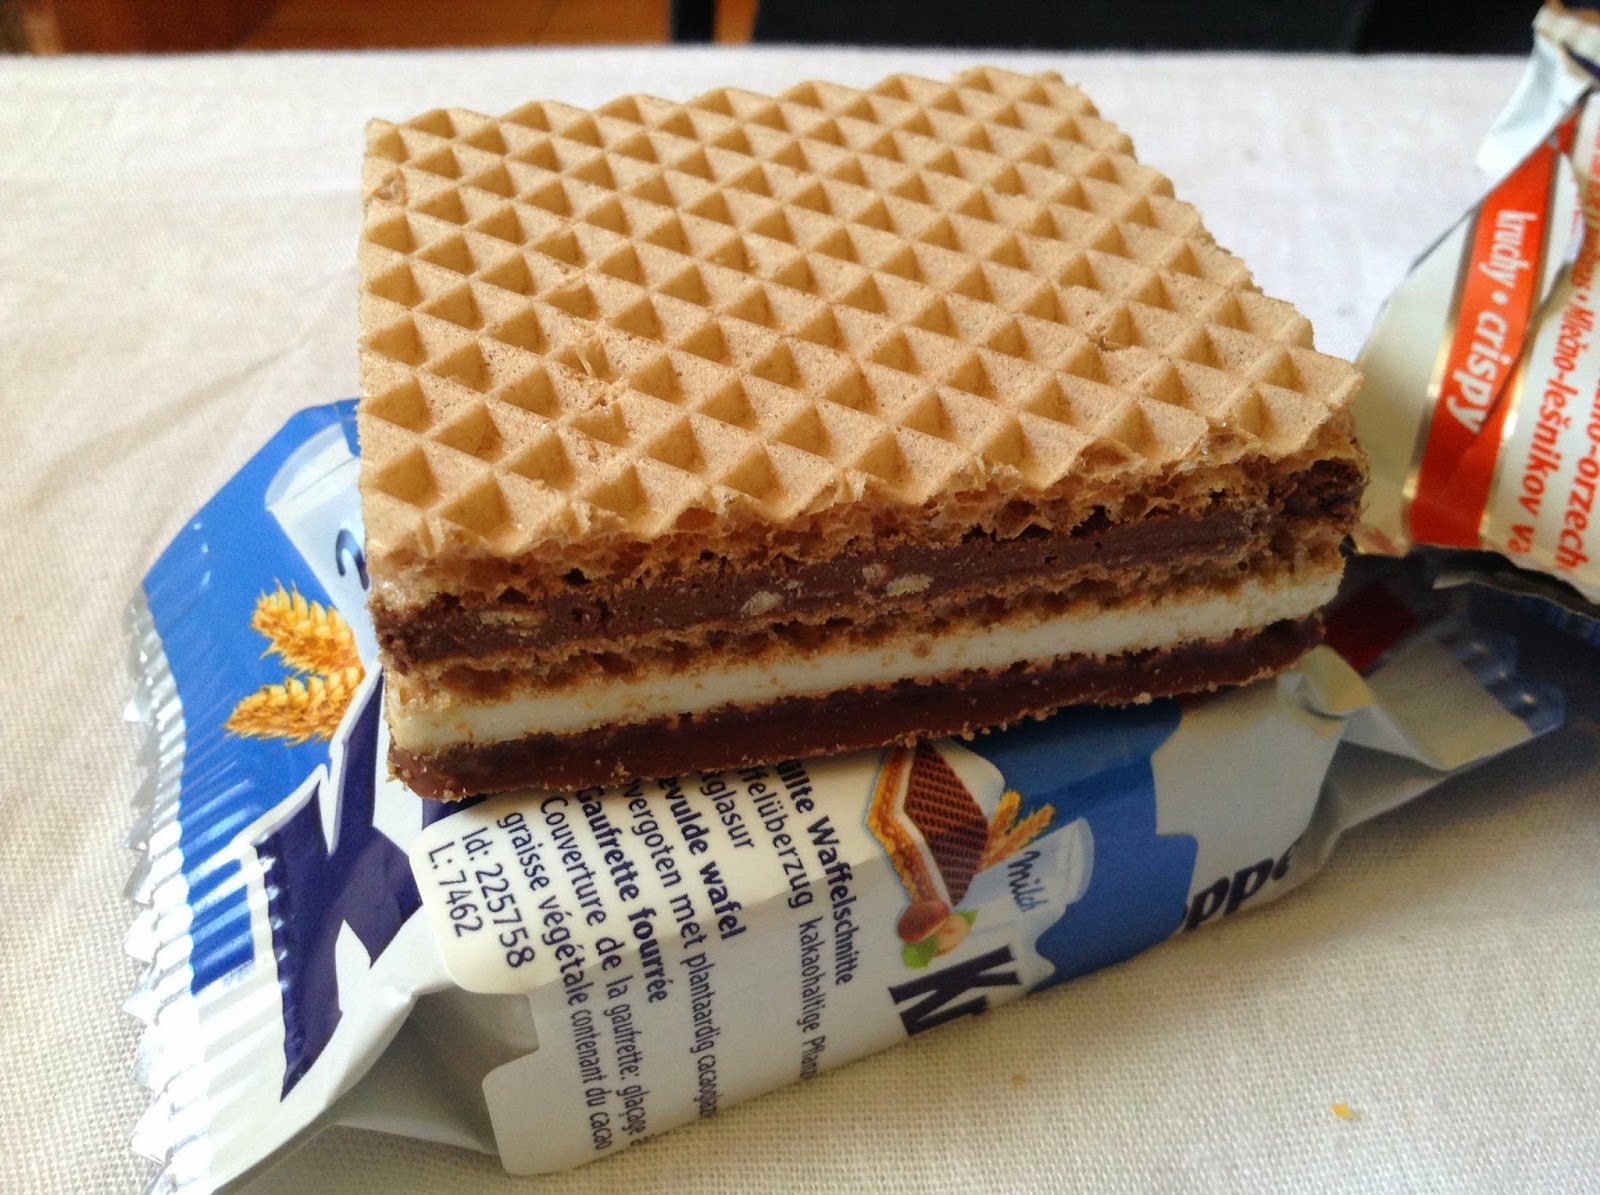 The wafer`s layers: vanilla wafer, a thick hazelnut creme, another waf...